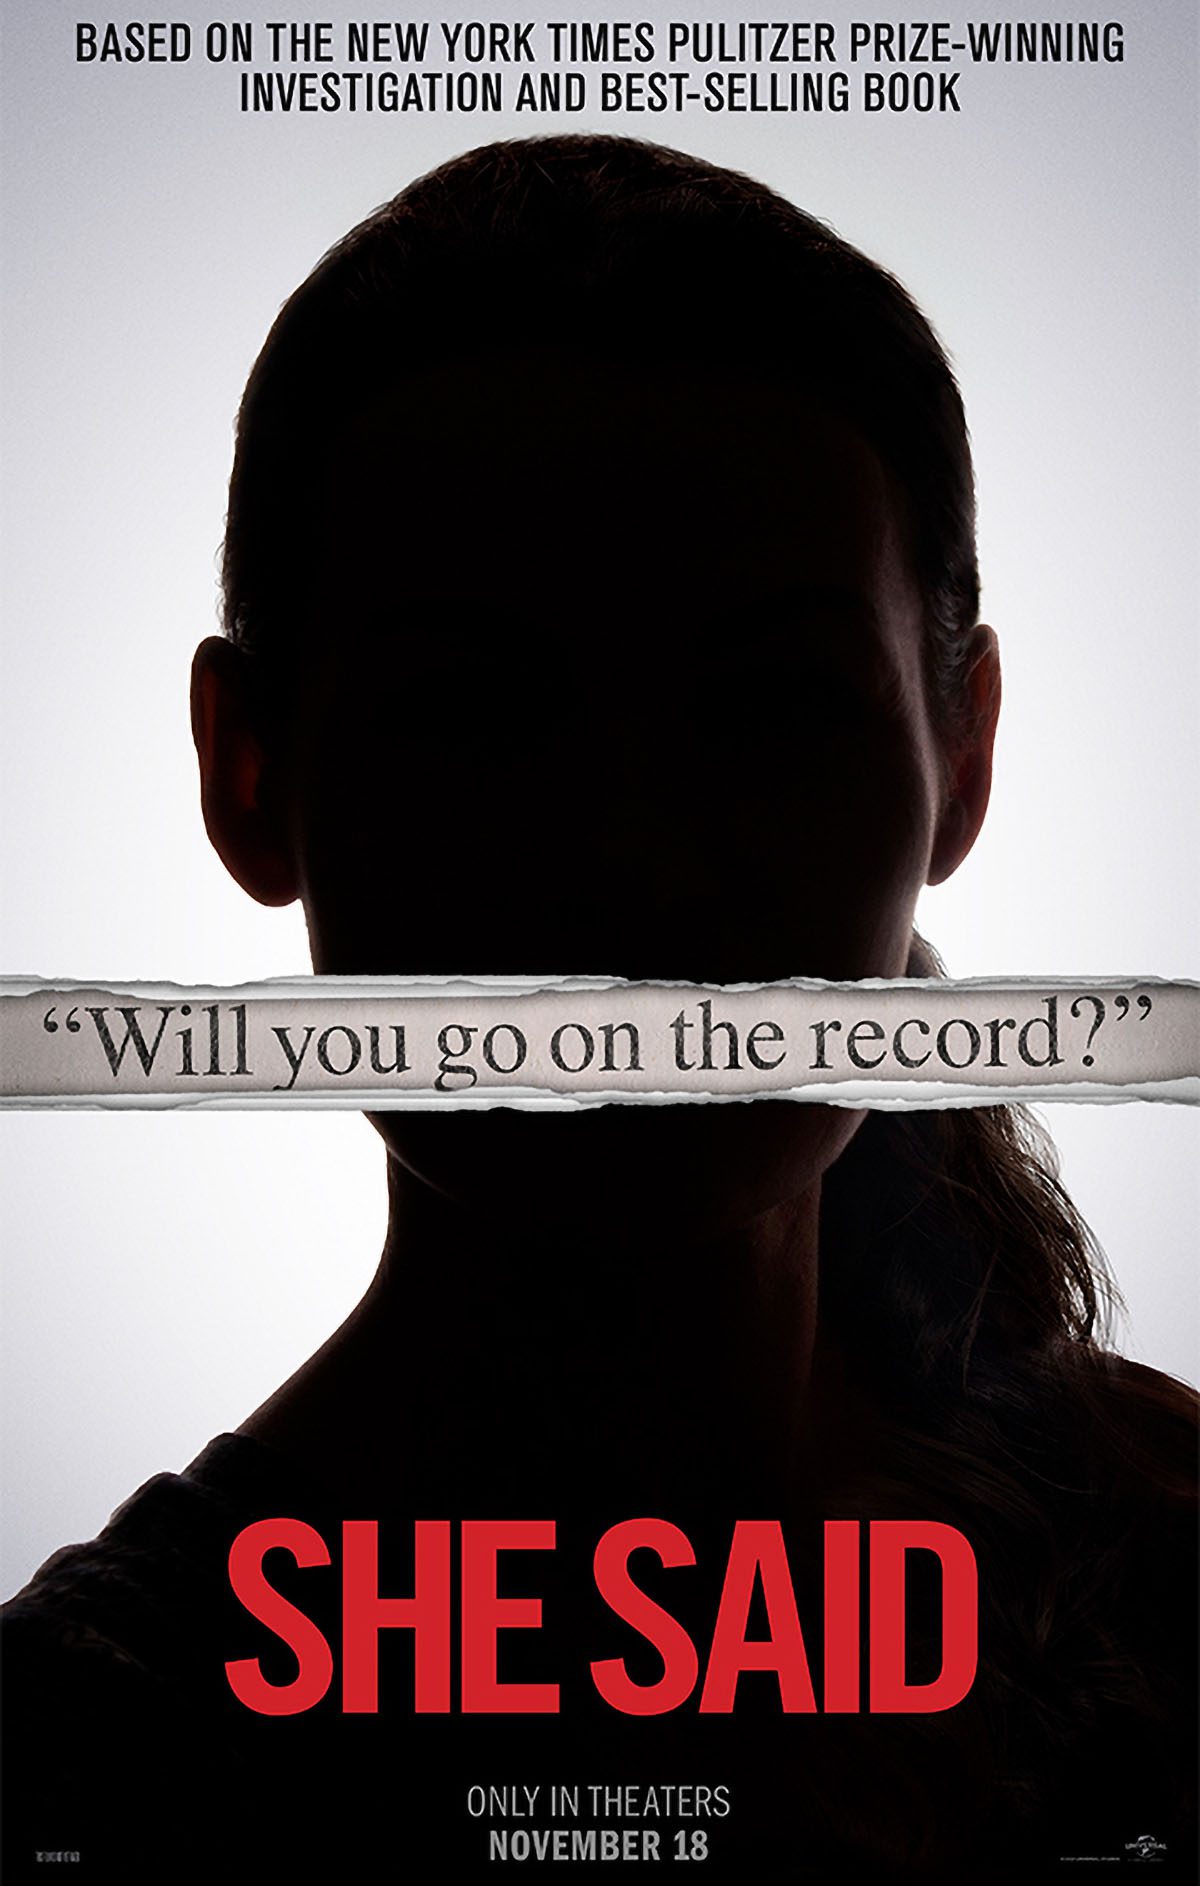 Movie poster for "She Said" depicts a dark figure and reads "will you go on the record?"